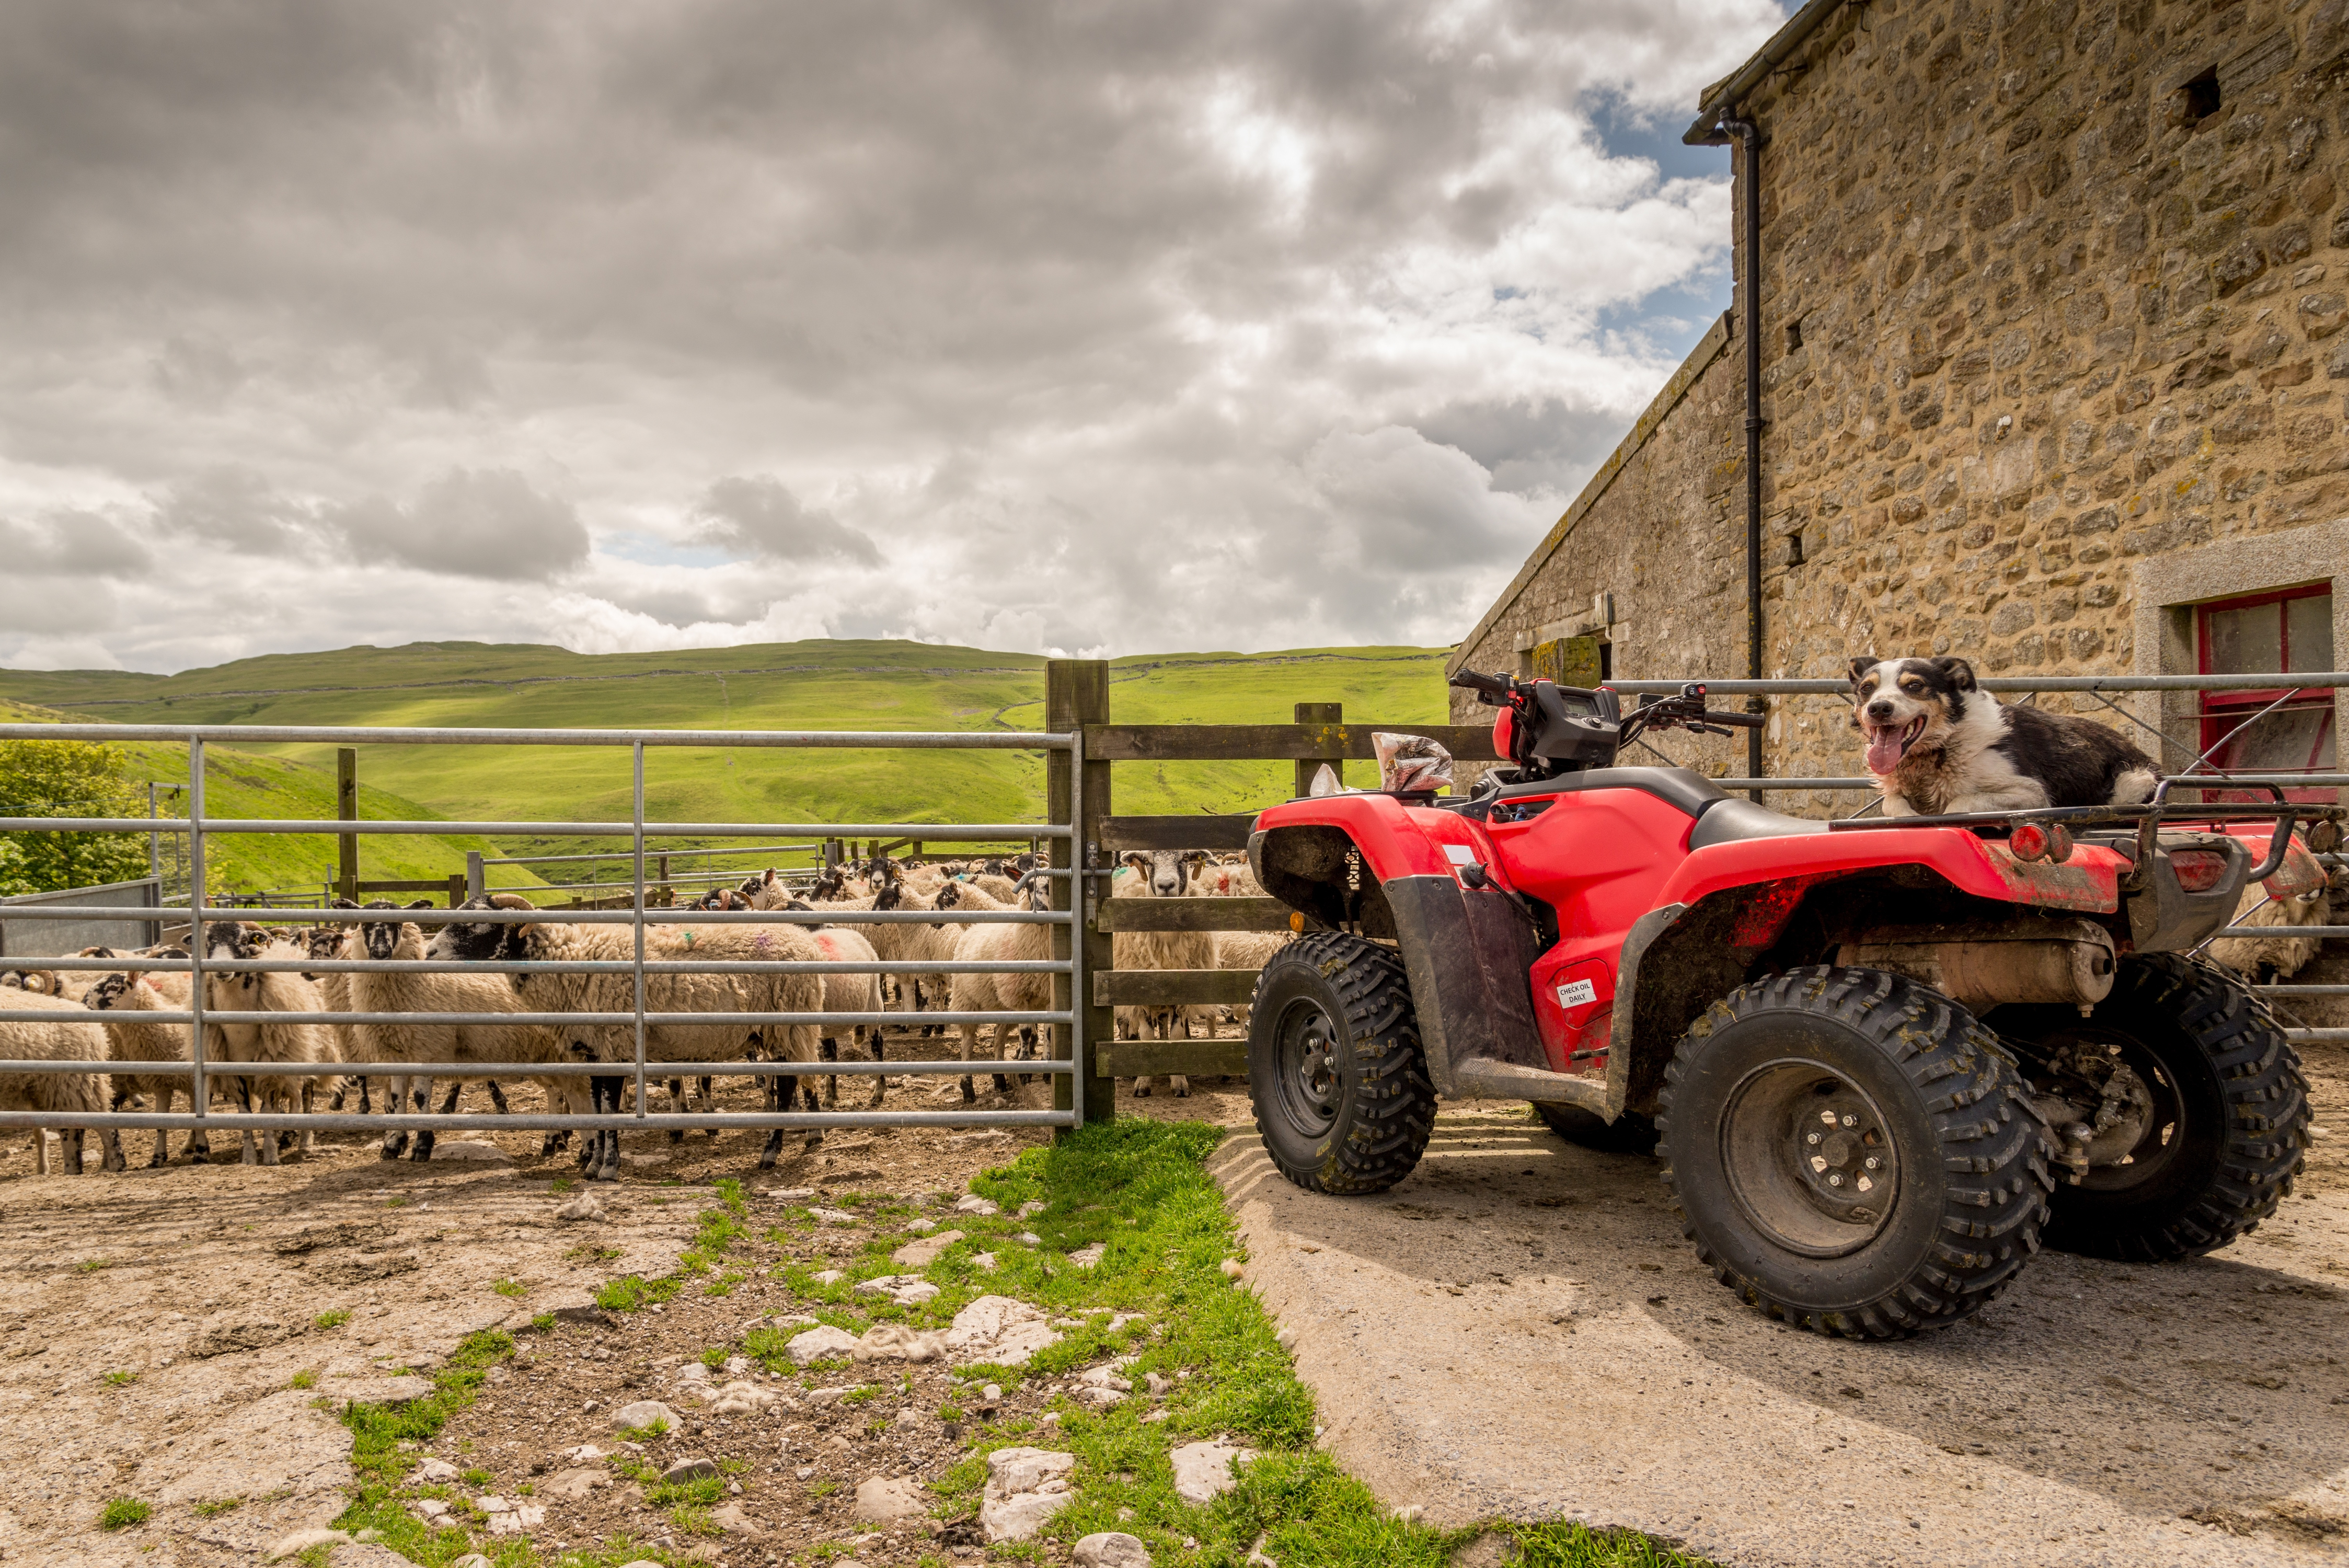 High compliance for new quadbike laws